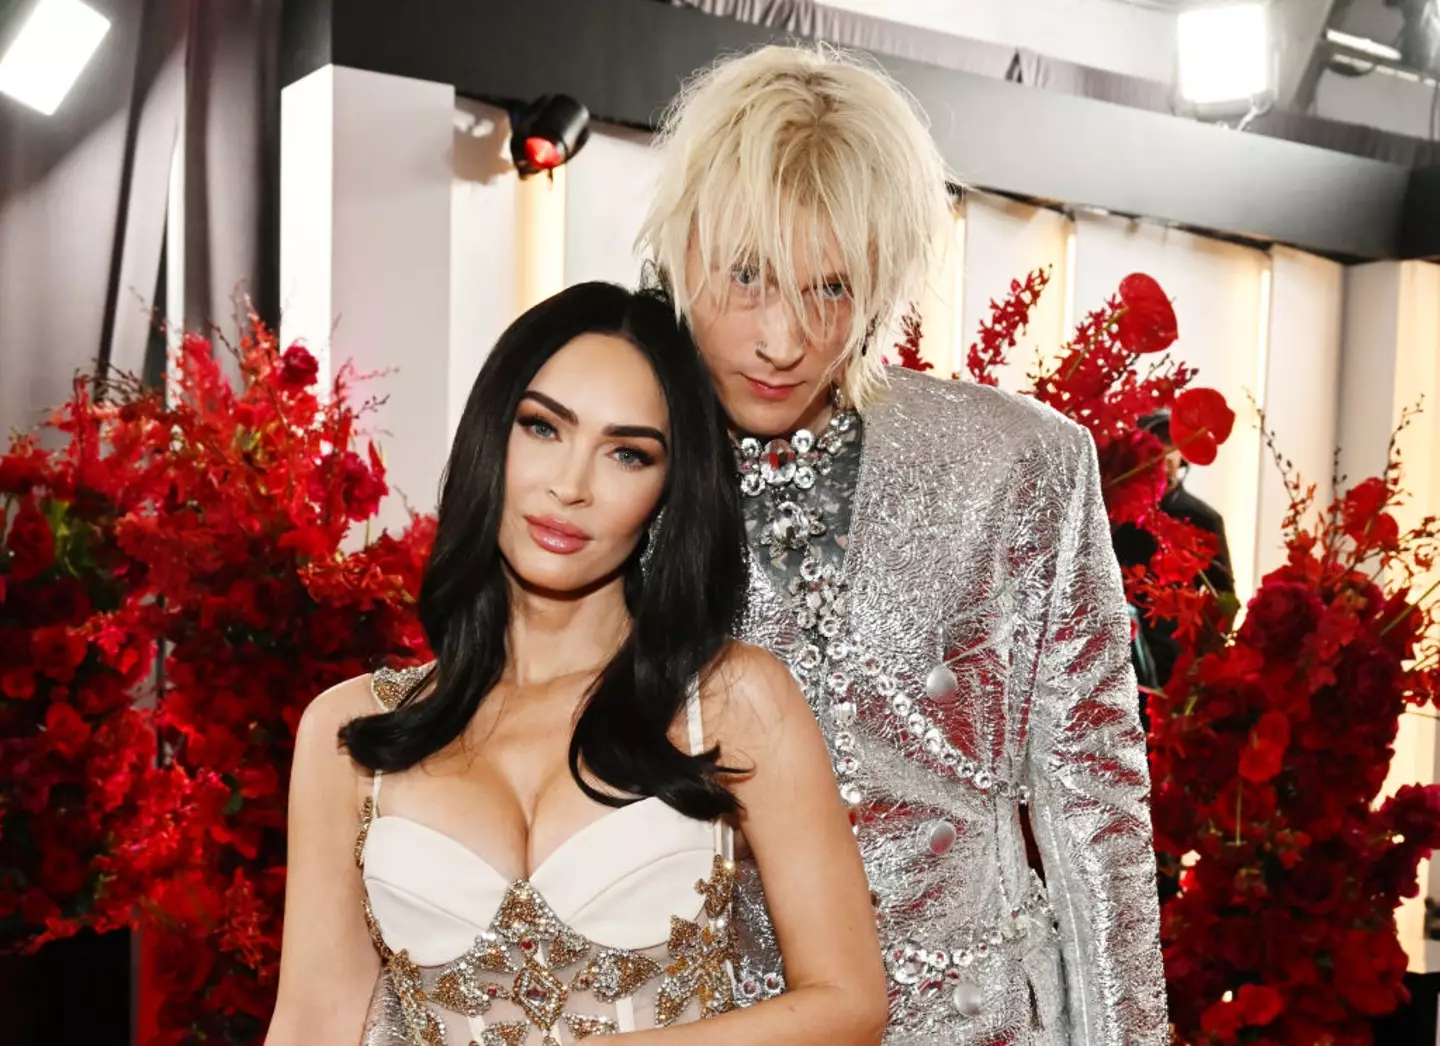 Megan Fox announced that she had called off her engagement with Machine Gun Kelly on March 21. (Lester Cohen/Getty Images for The Recording Academy)